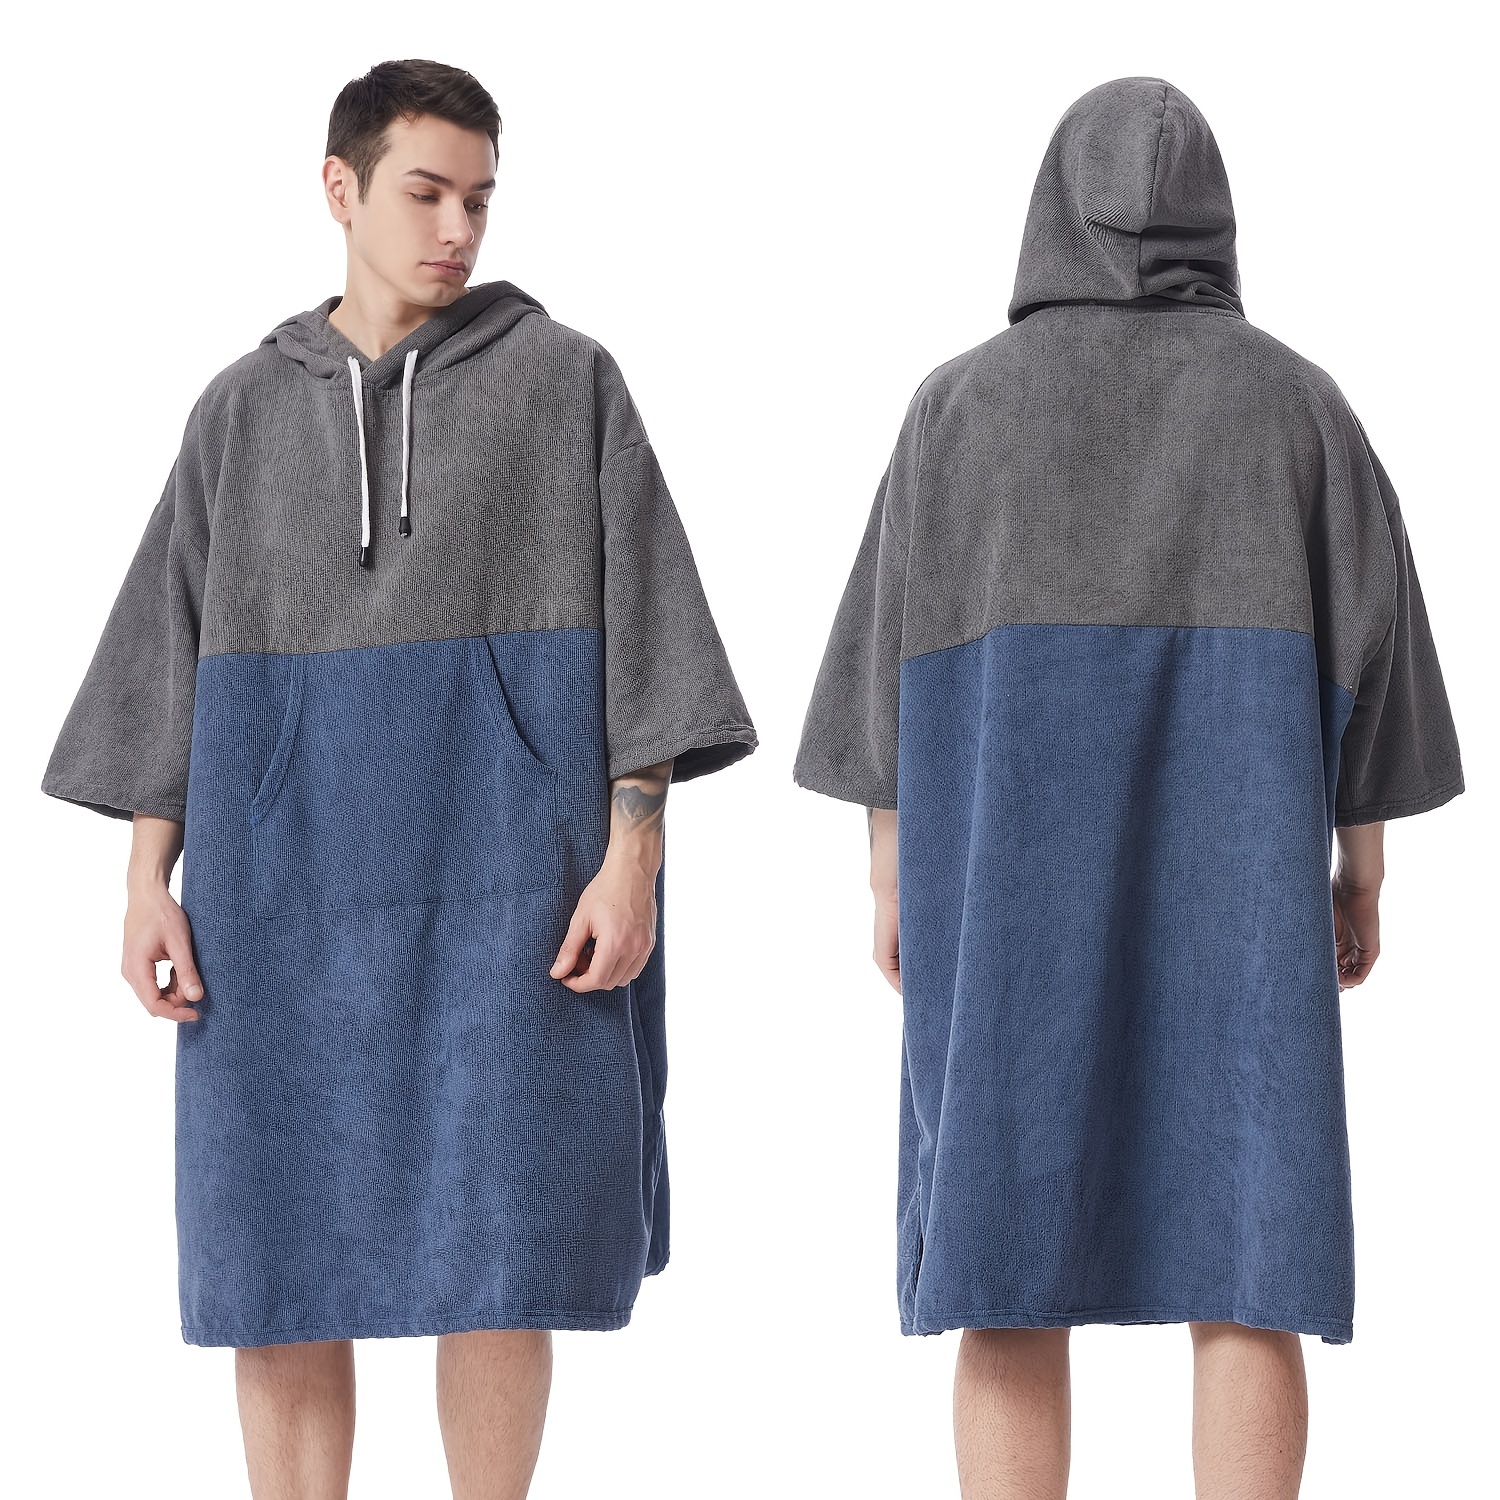 Mutao Changing Robe With Hood Quick Dry Middle Length Sleeve Changing Towel Terry Bathrobe Windproof Beach Robe Surfing Diving Swimming Towel Poncho One Size Fit All